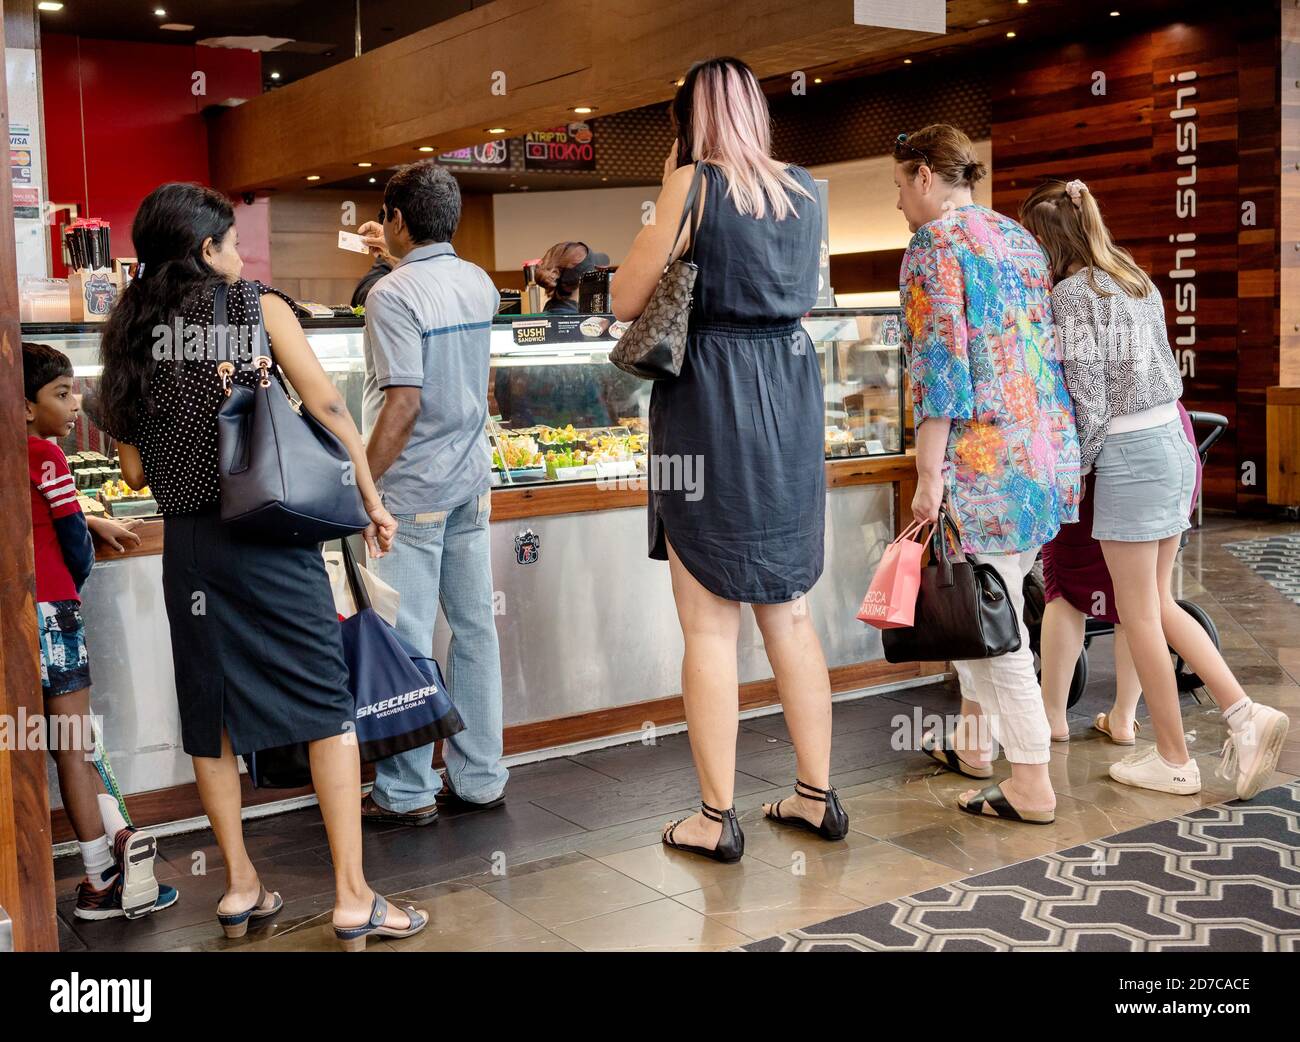 Shopping Outlet Franchise High Resolution Stock Photography and Images -  Alamy